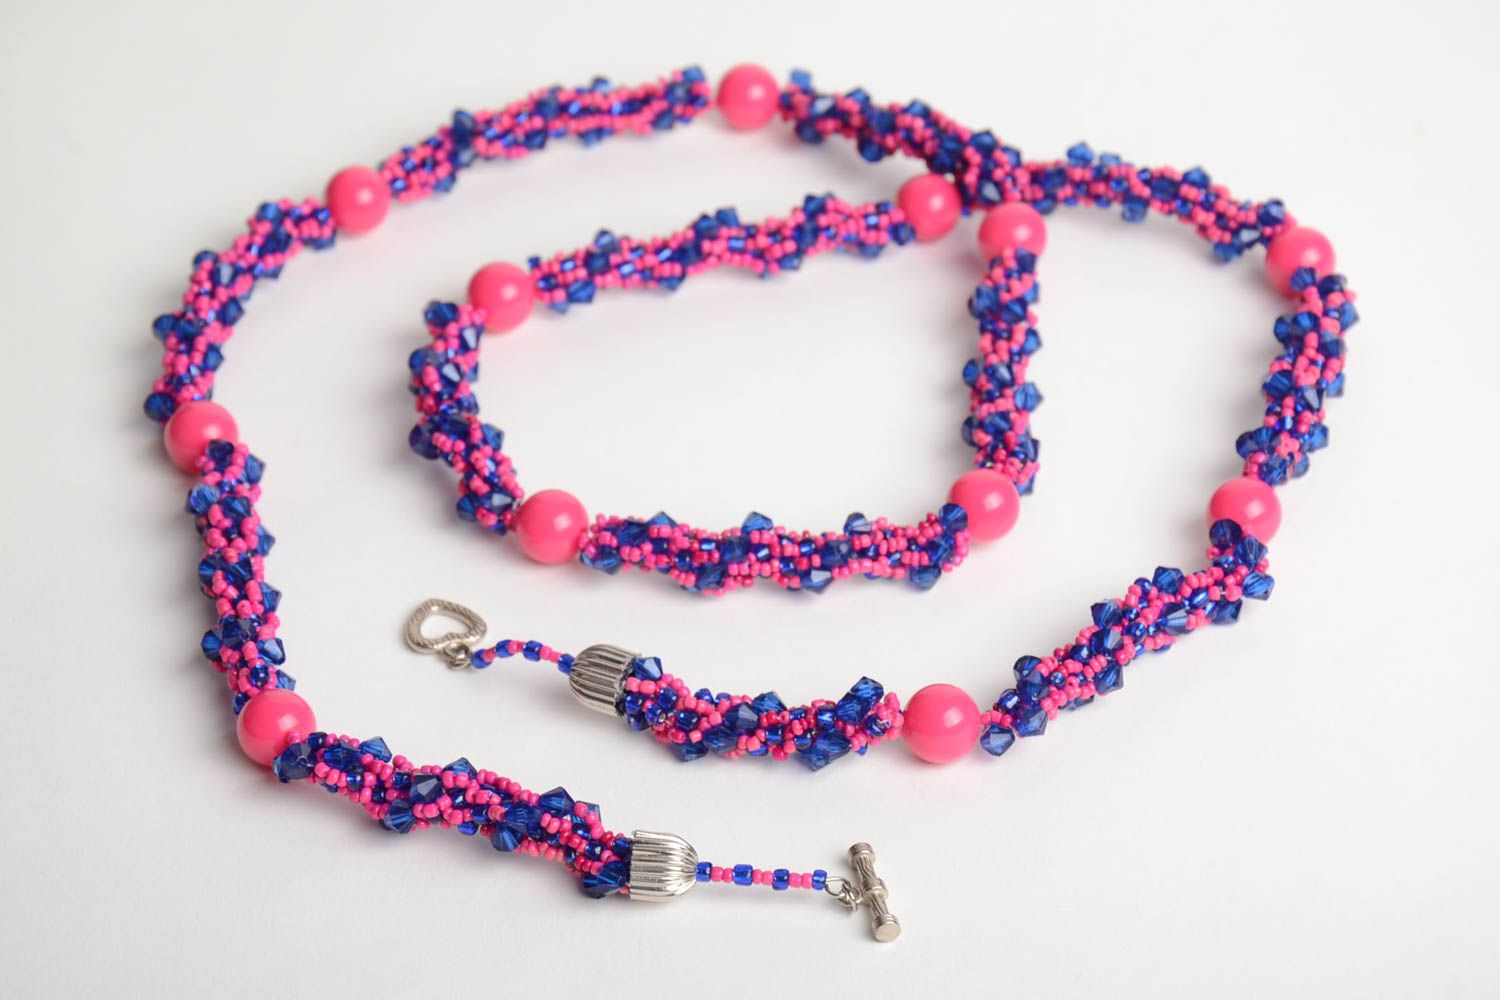 Handmade designer women's necklace crocheted of bright pink and blue Czech beads photo 3